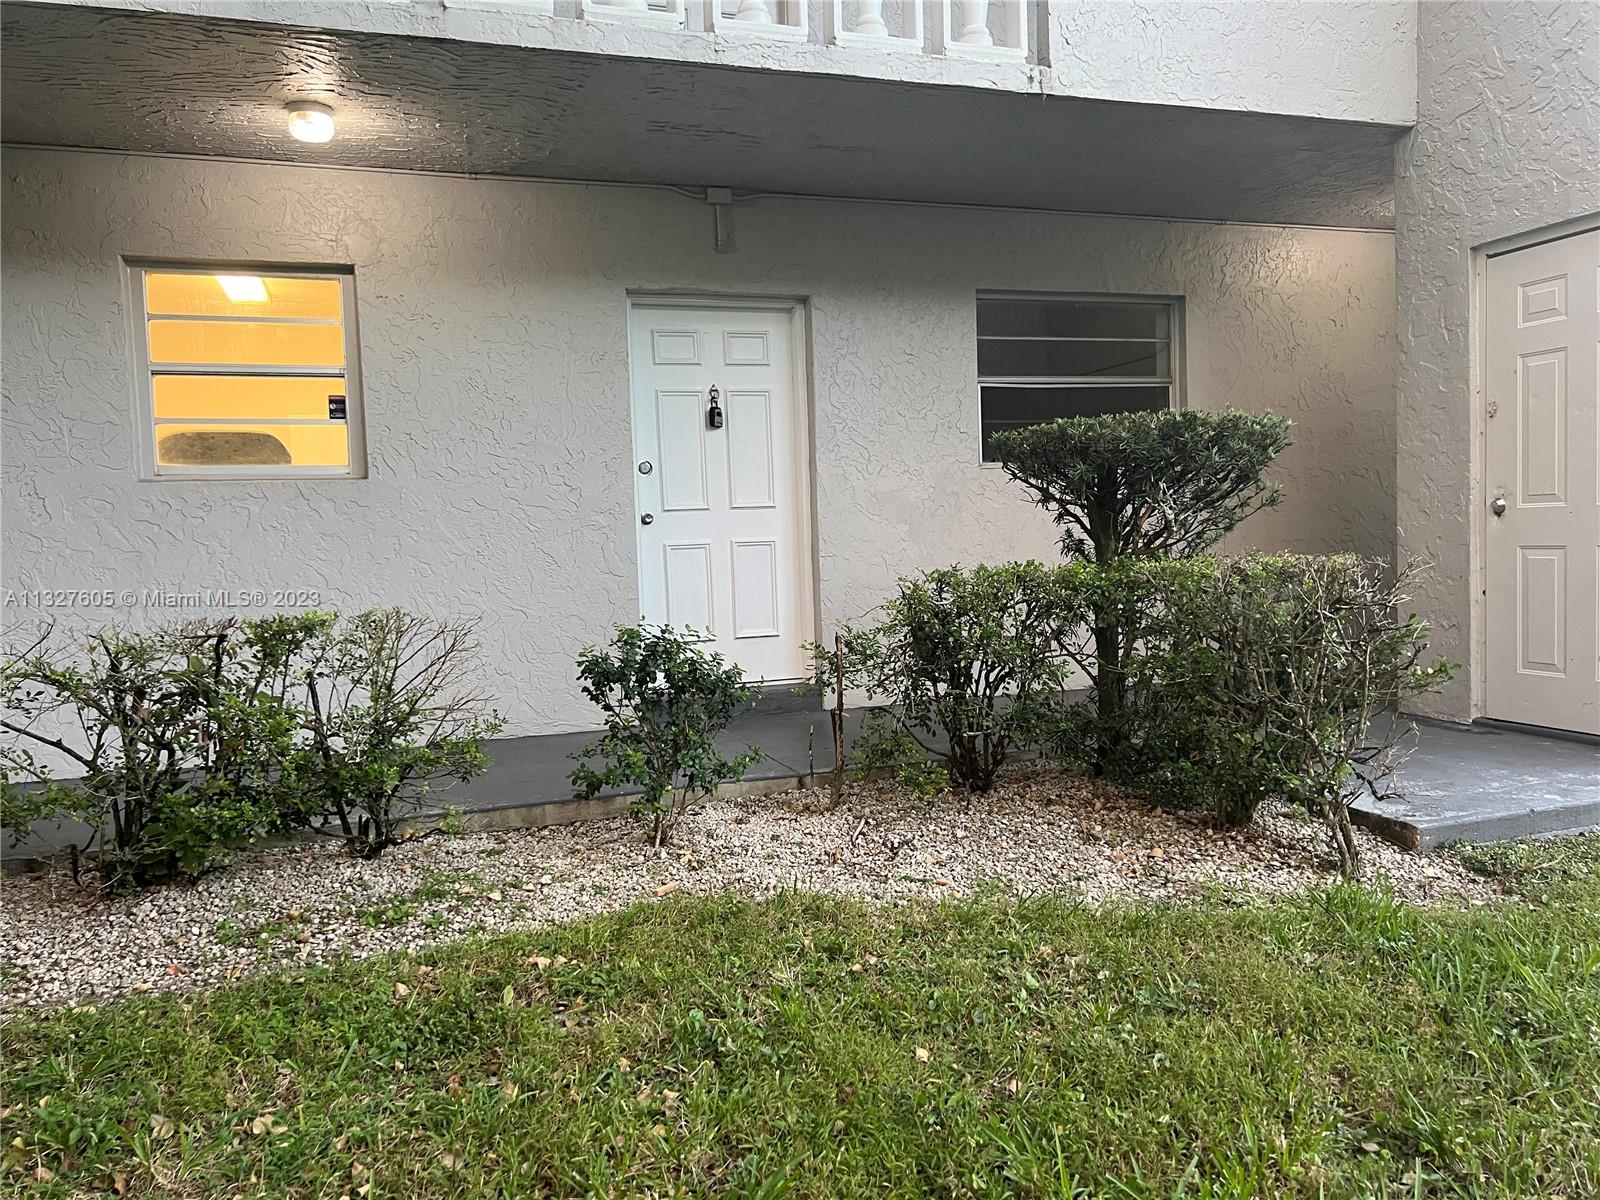 Live close to everything, Condo in prime location. Fully remodeled condo at VILLAGE HOMES & CONDOS in Palmetto Bay, feature 2 bedrooms, 1 bathroom, freshly painted, Stainless Steel appliances will be placed in unit. Easy to show.